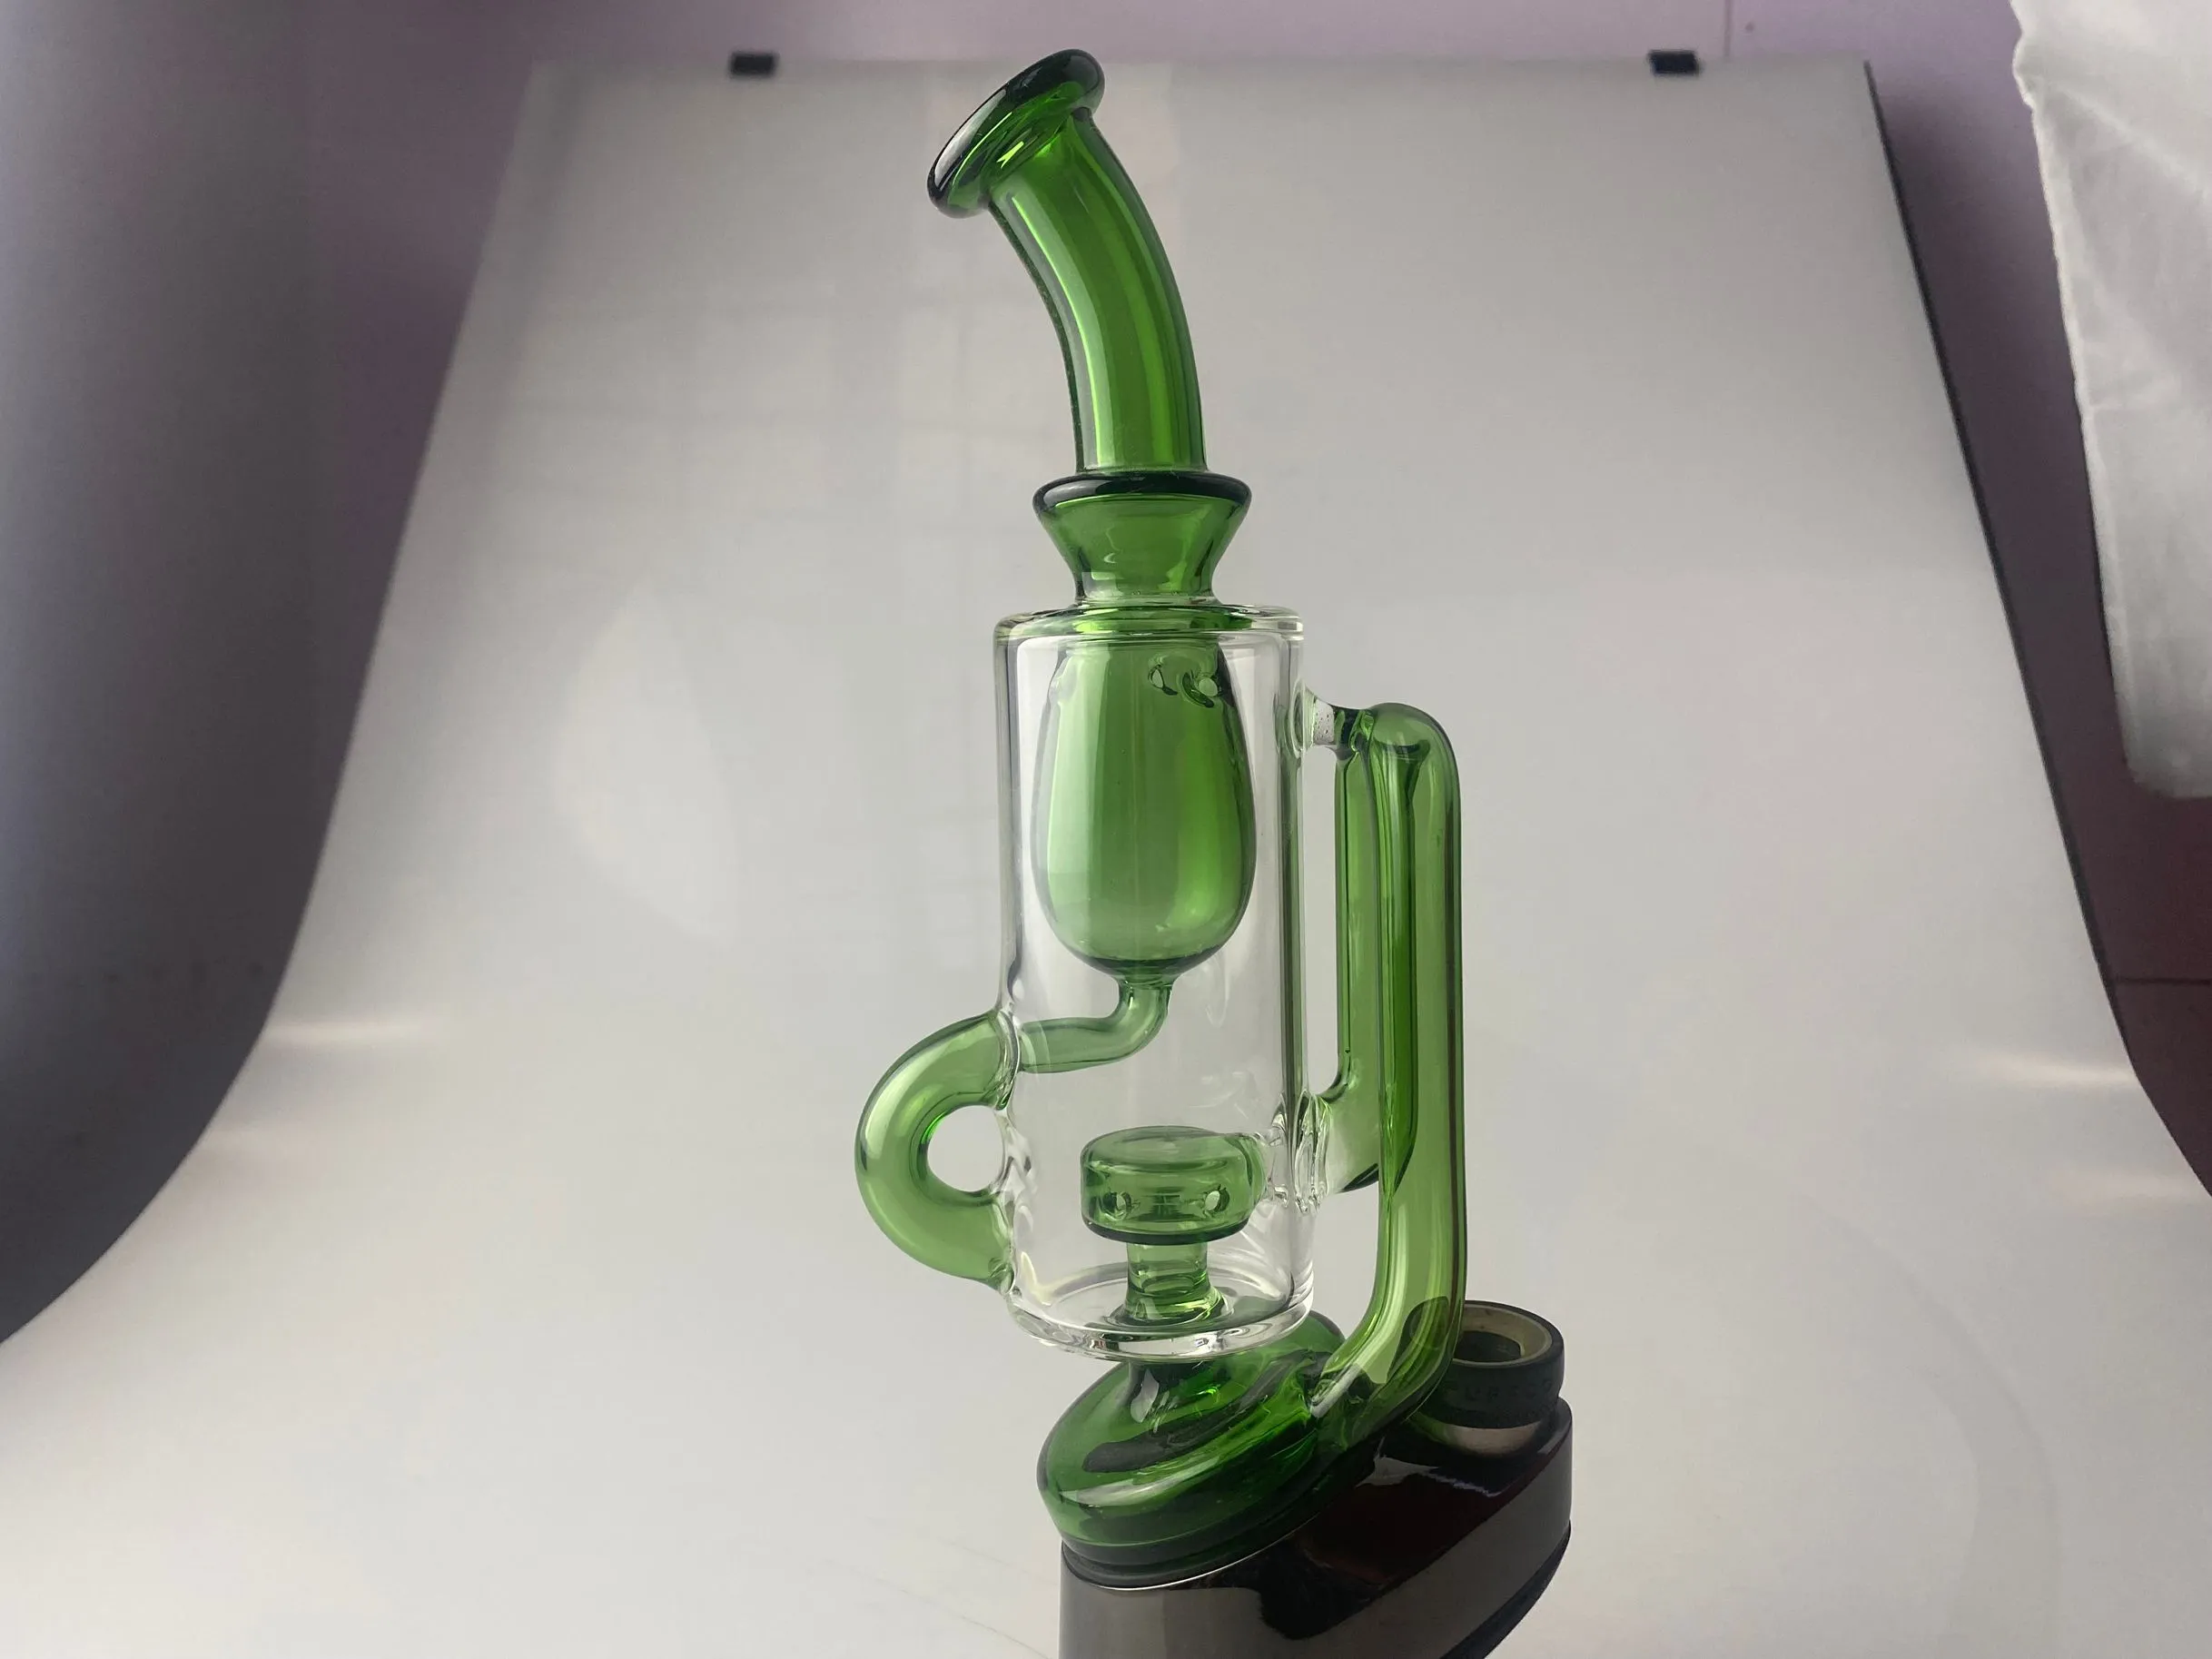 Unique BIAO Glass Bongs cup Style Hookahs Water Pipes green color fitting to peak